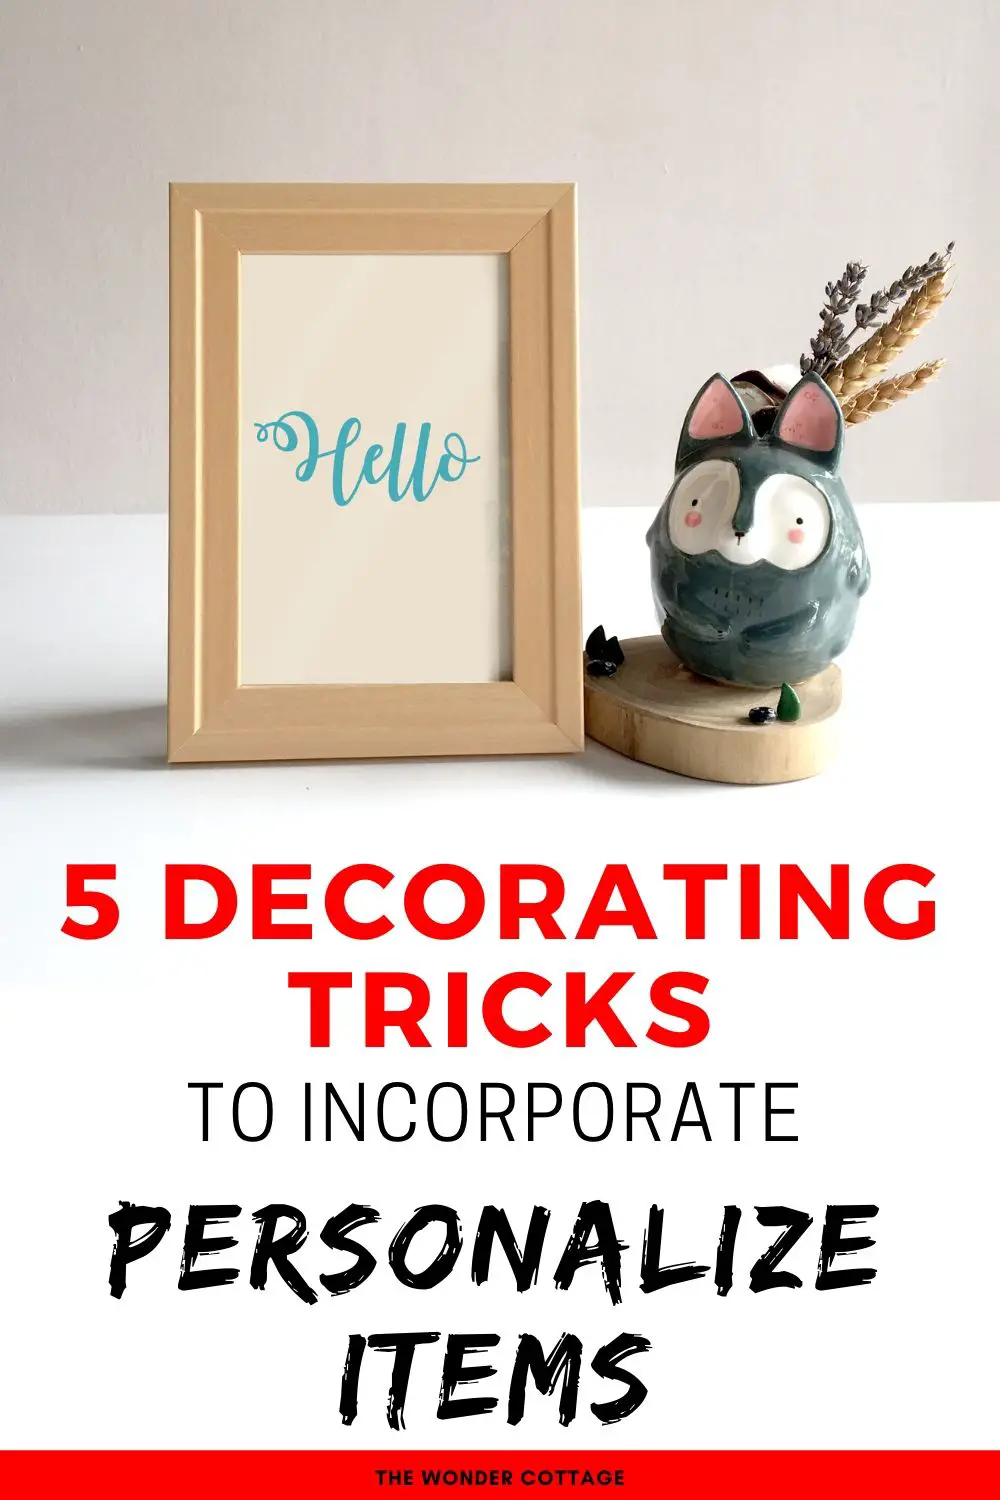 5 tricks to incorporate personalize items into your home